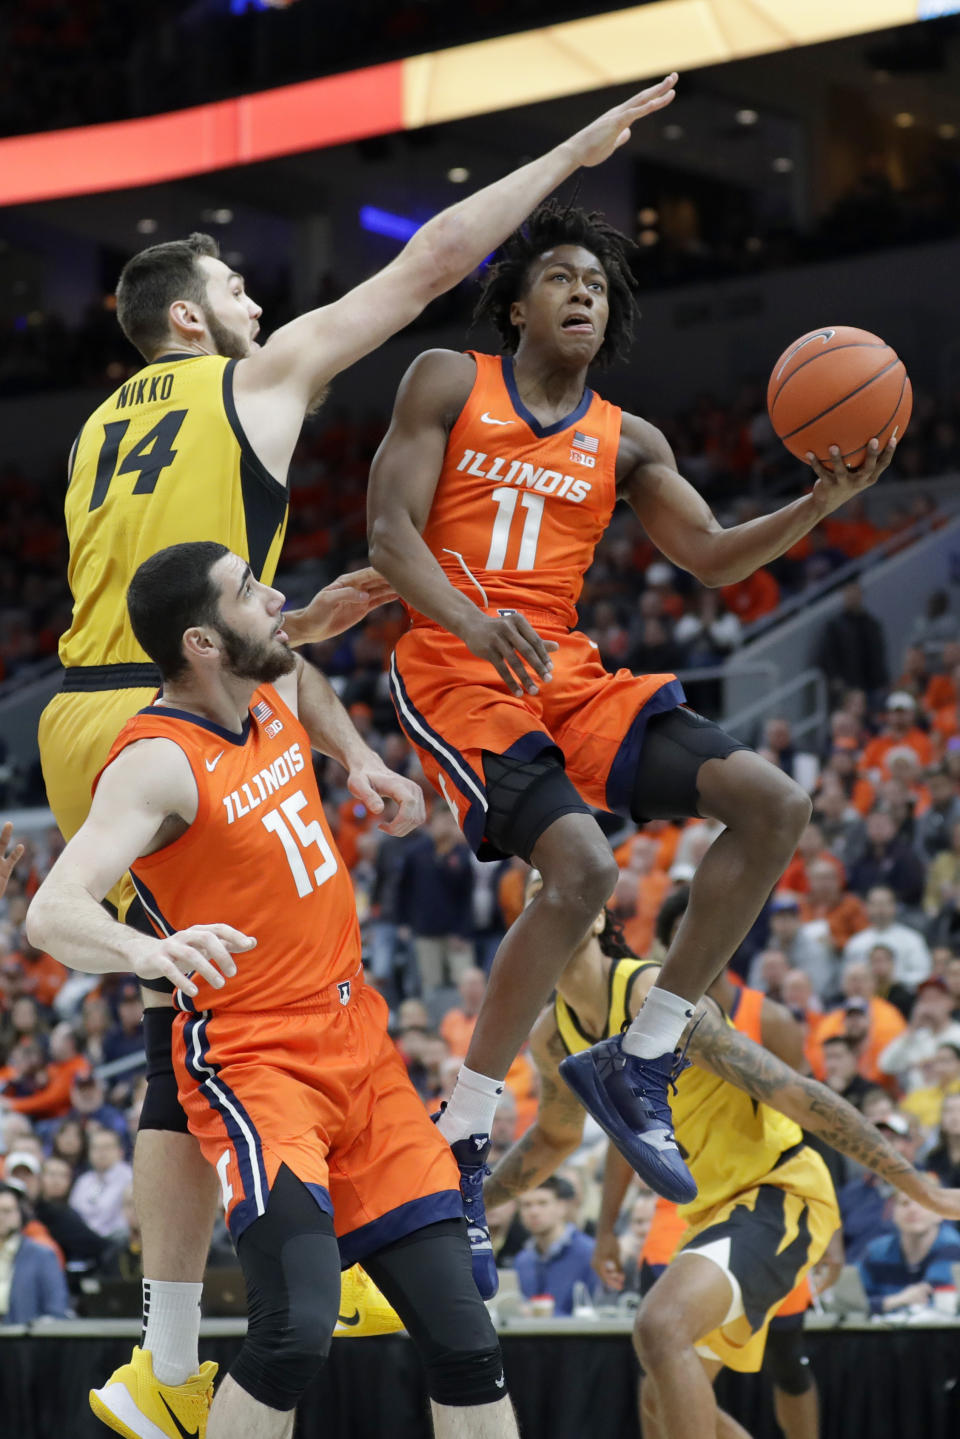 Illinois' Ayo Dosunmu (11) heads to the basket past teammate Giorgi Bezhanishvili (15) and Missouri's Reed Nikko (14) during the first half of an NCAA college basketball game Saturday, Dec. 21, 2019, in St. Louis. (AP Photo/Jeff Roberson)